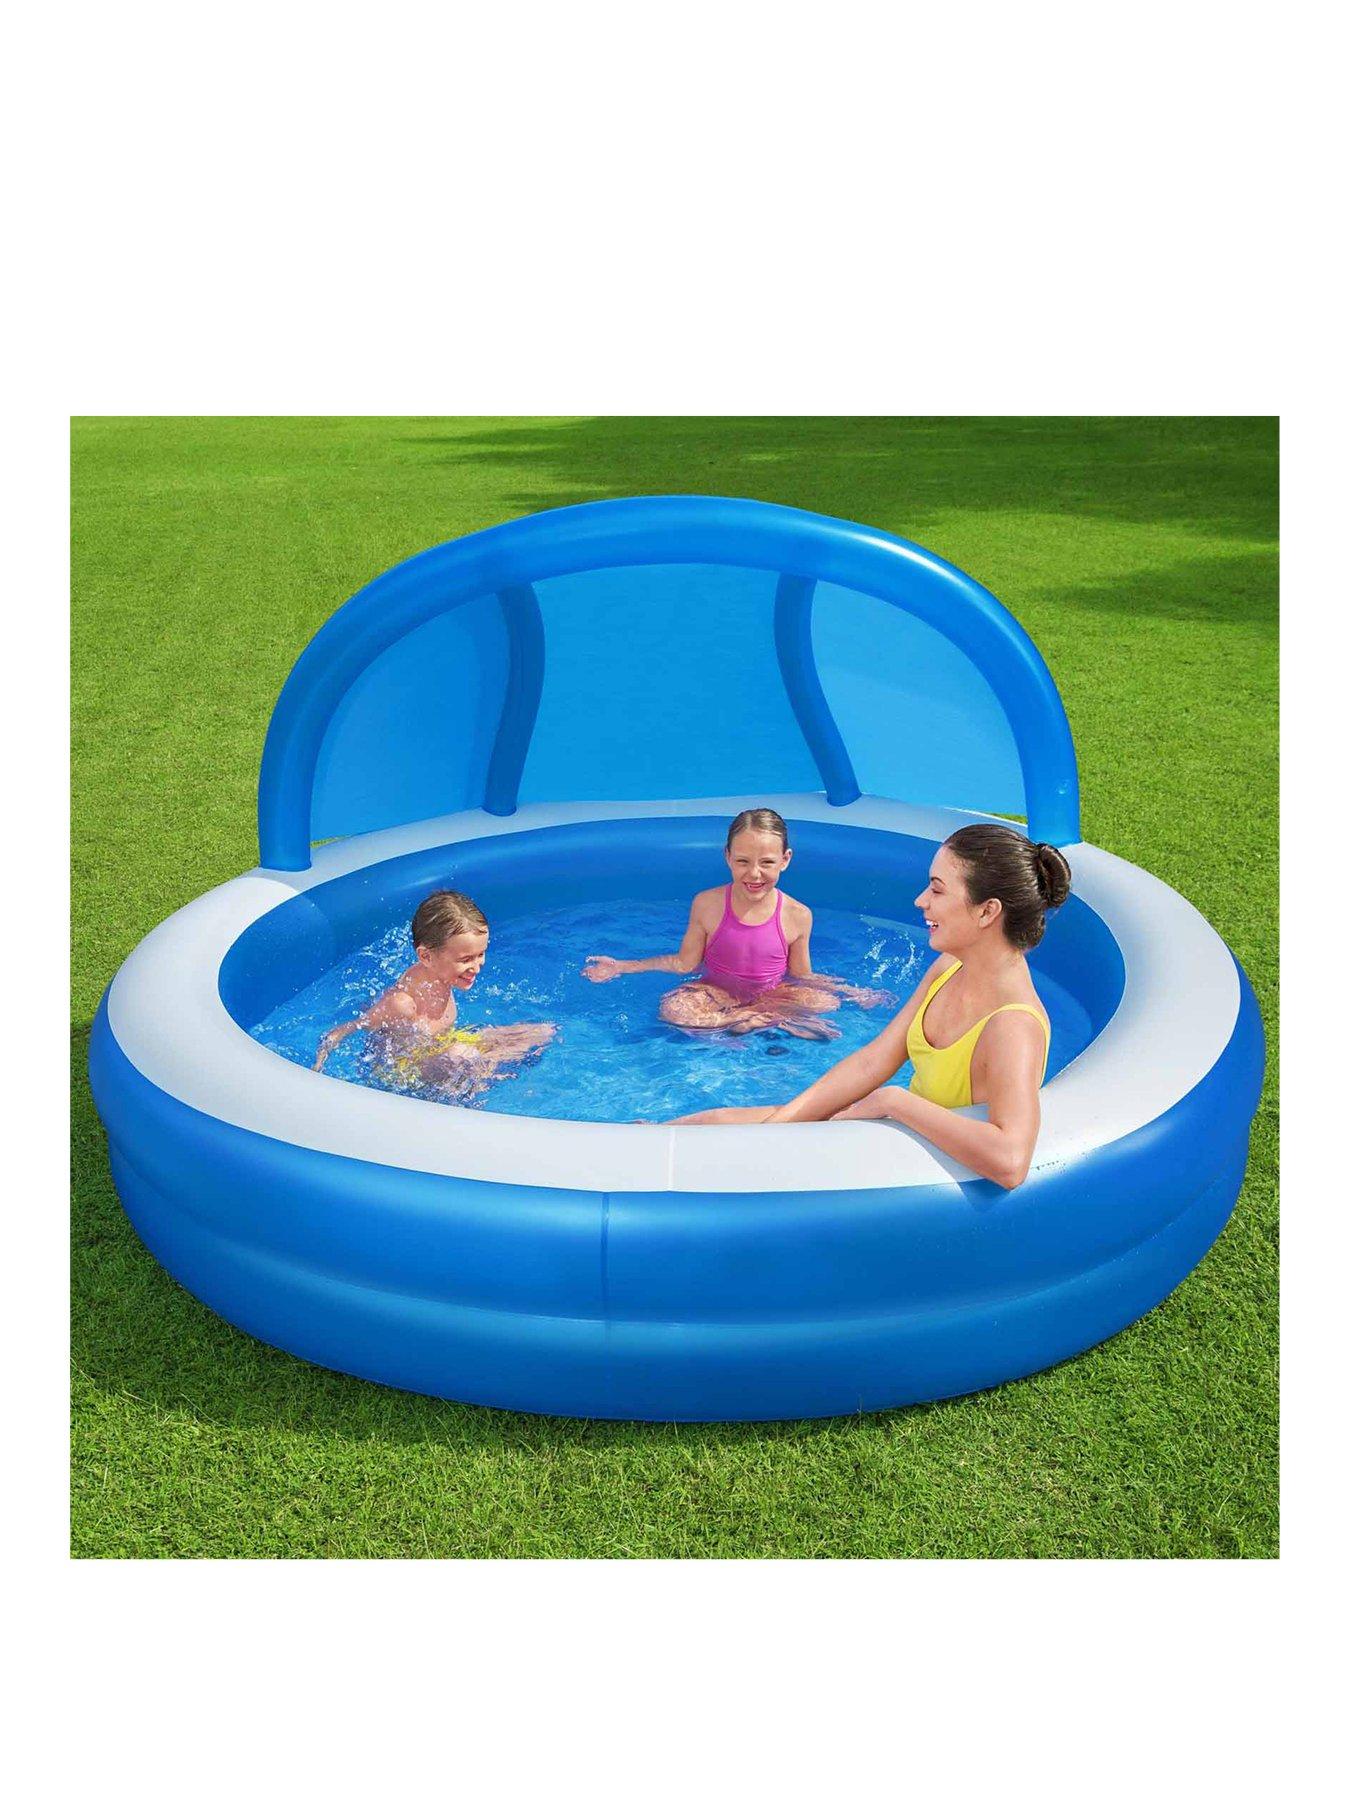 Mont Blanc Inflatable Family Home Hot Tub Spa/Cover Jacuzzi 4/6 Bathers Holiday 